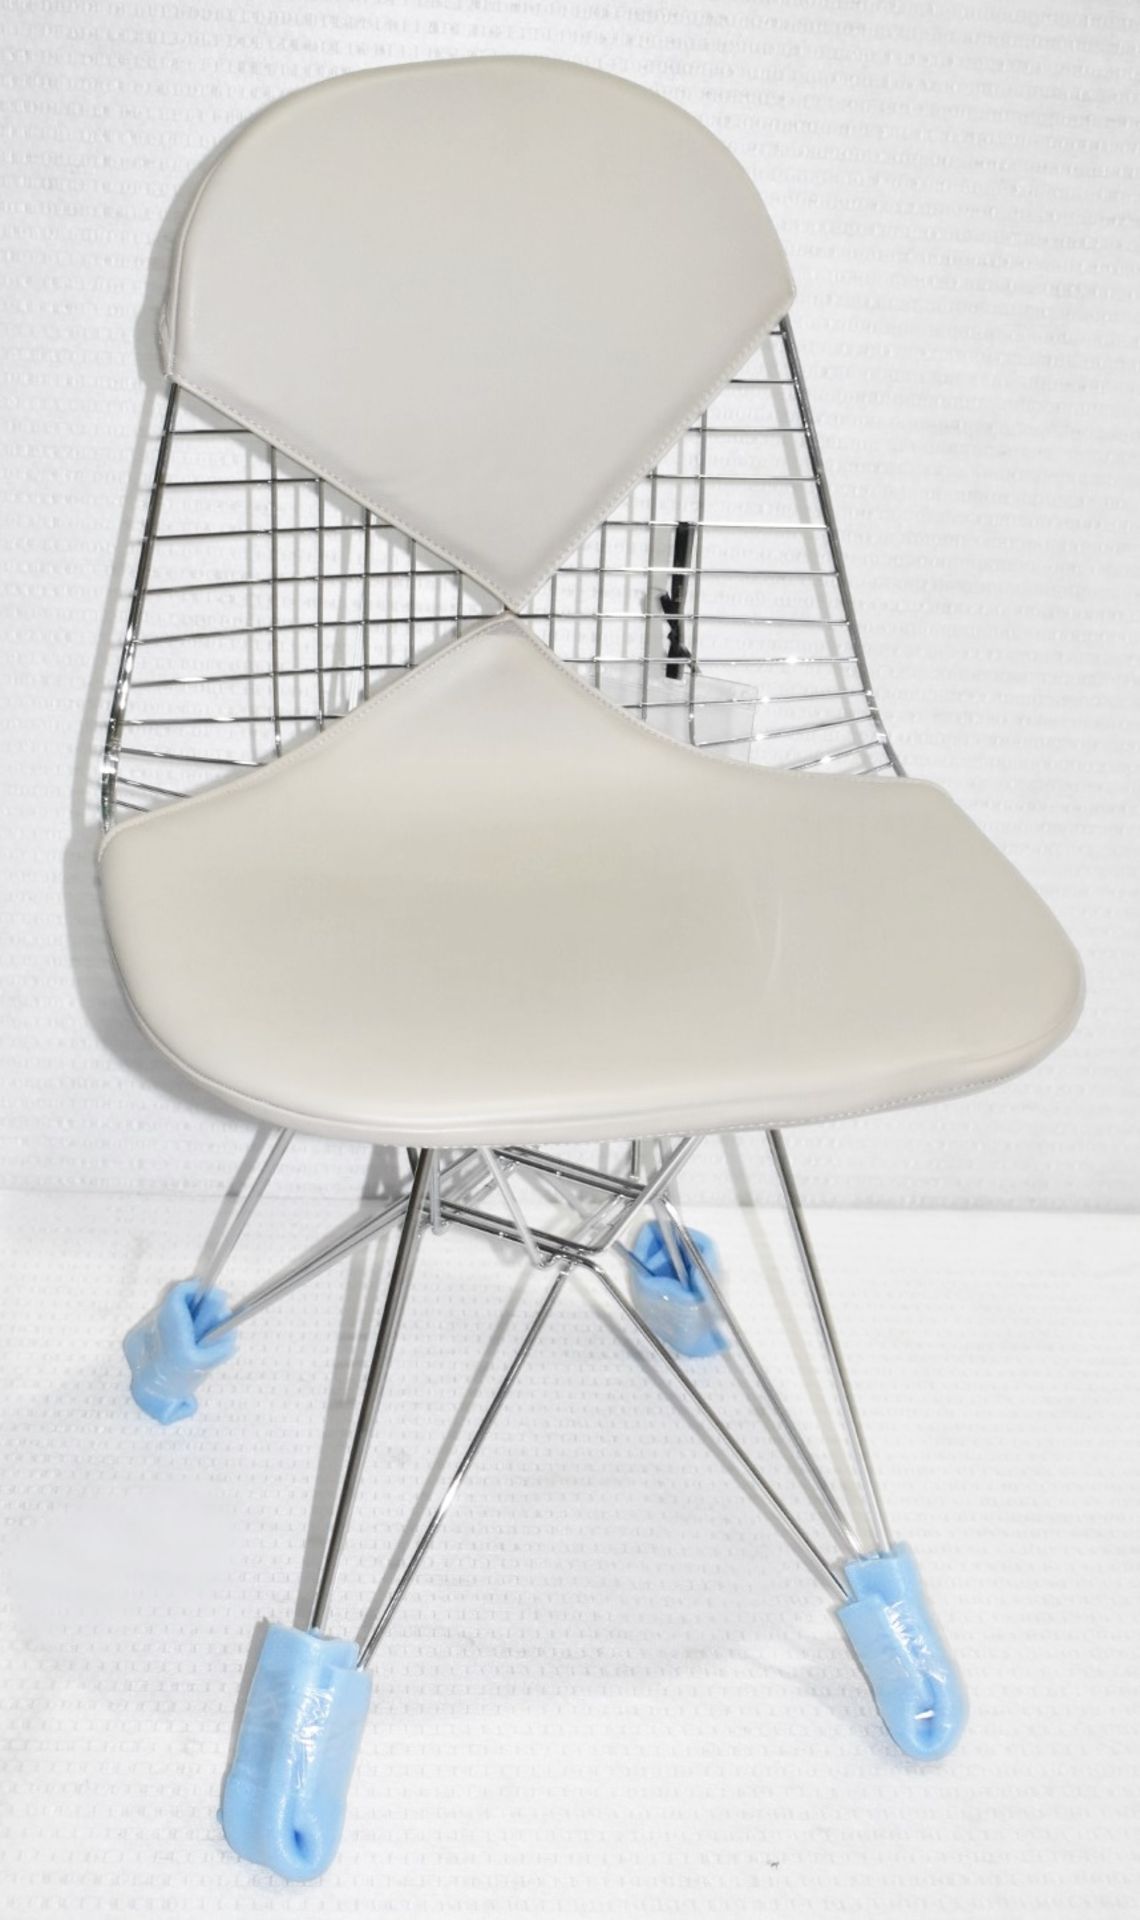 1 x VITRA Eames 'Wire DKR-2' Designer Leather Upholstered Chair in Sand & Chrome - RRP £660.00 - Image 8 of 10